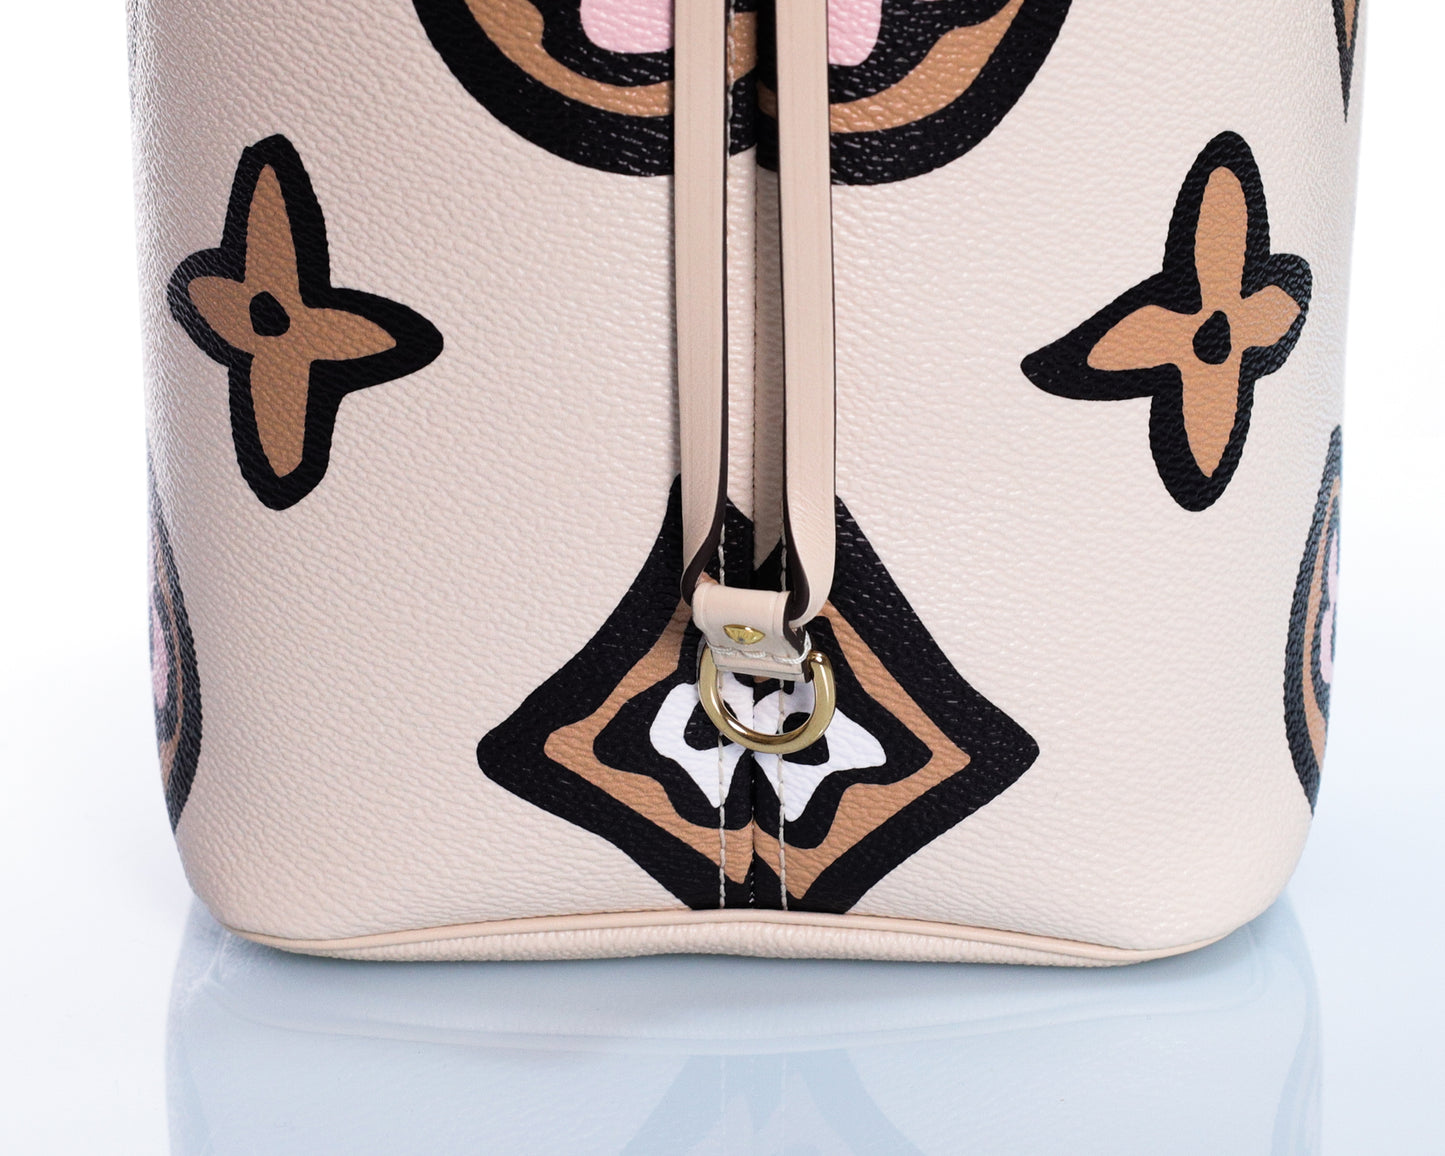 LOUIS VUITTON Neverfull MM Wild at Heart M45819 White